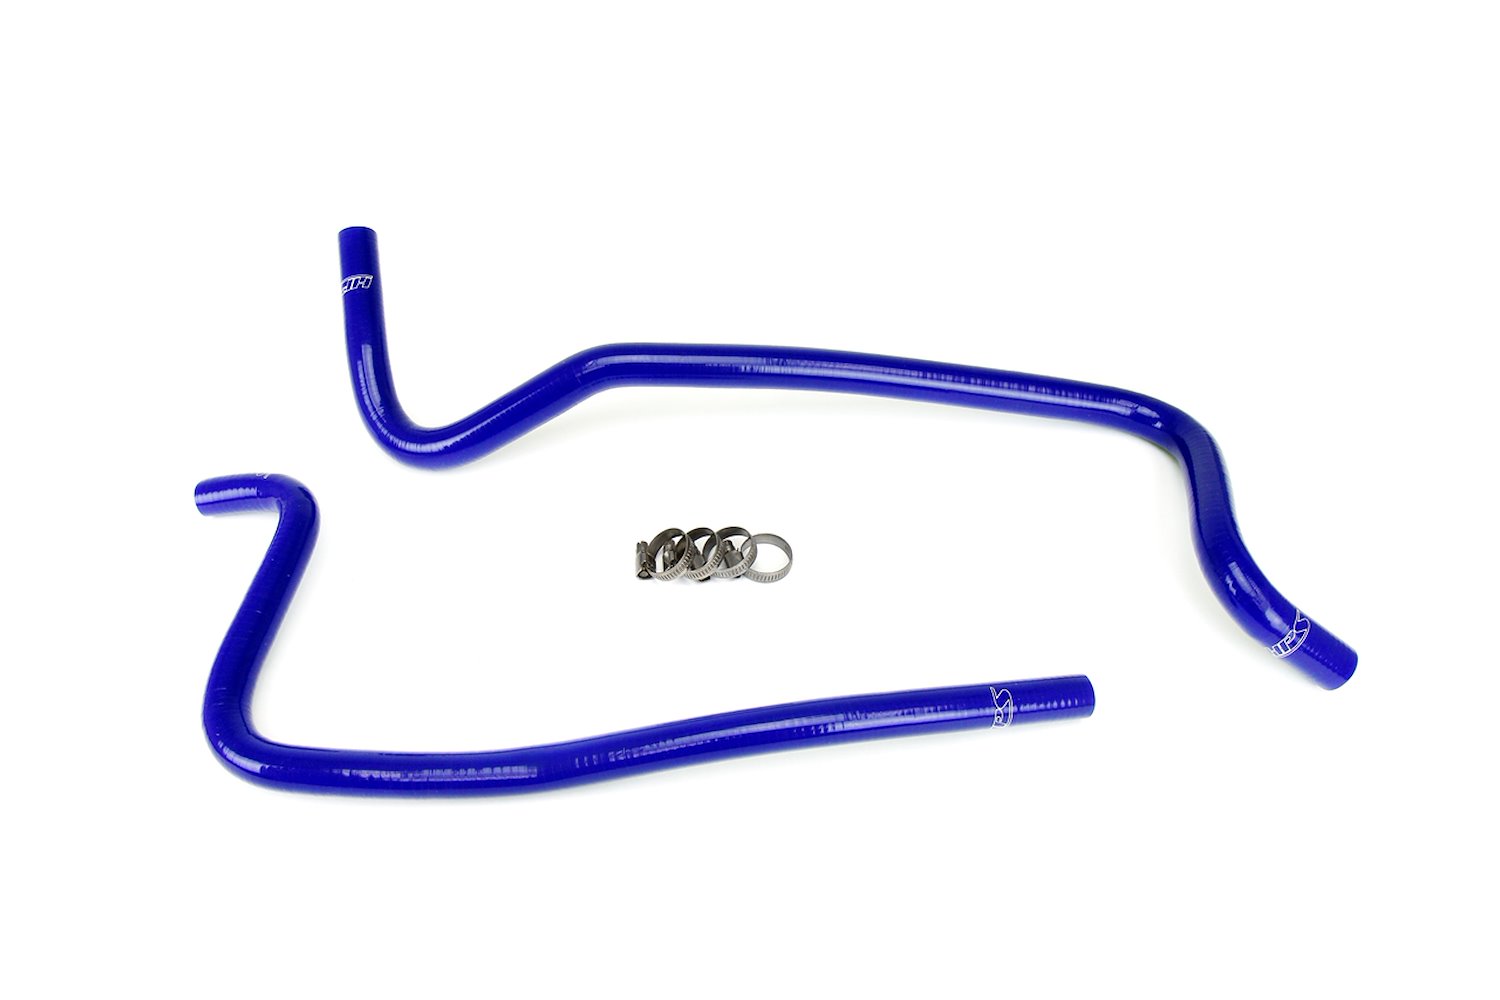 57-1283-BLUE Heater Hose Kit, High-Temp 3-Ply Reinforced Silicone, Replace OEM Rubber Heater Coolant Hoses